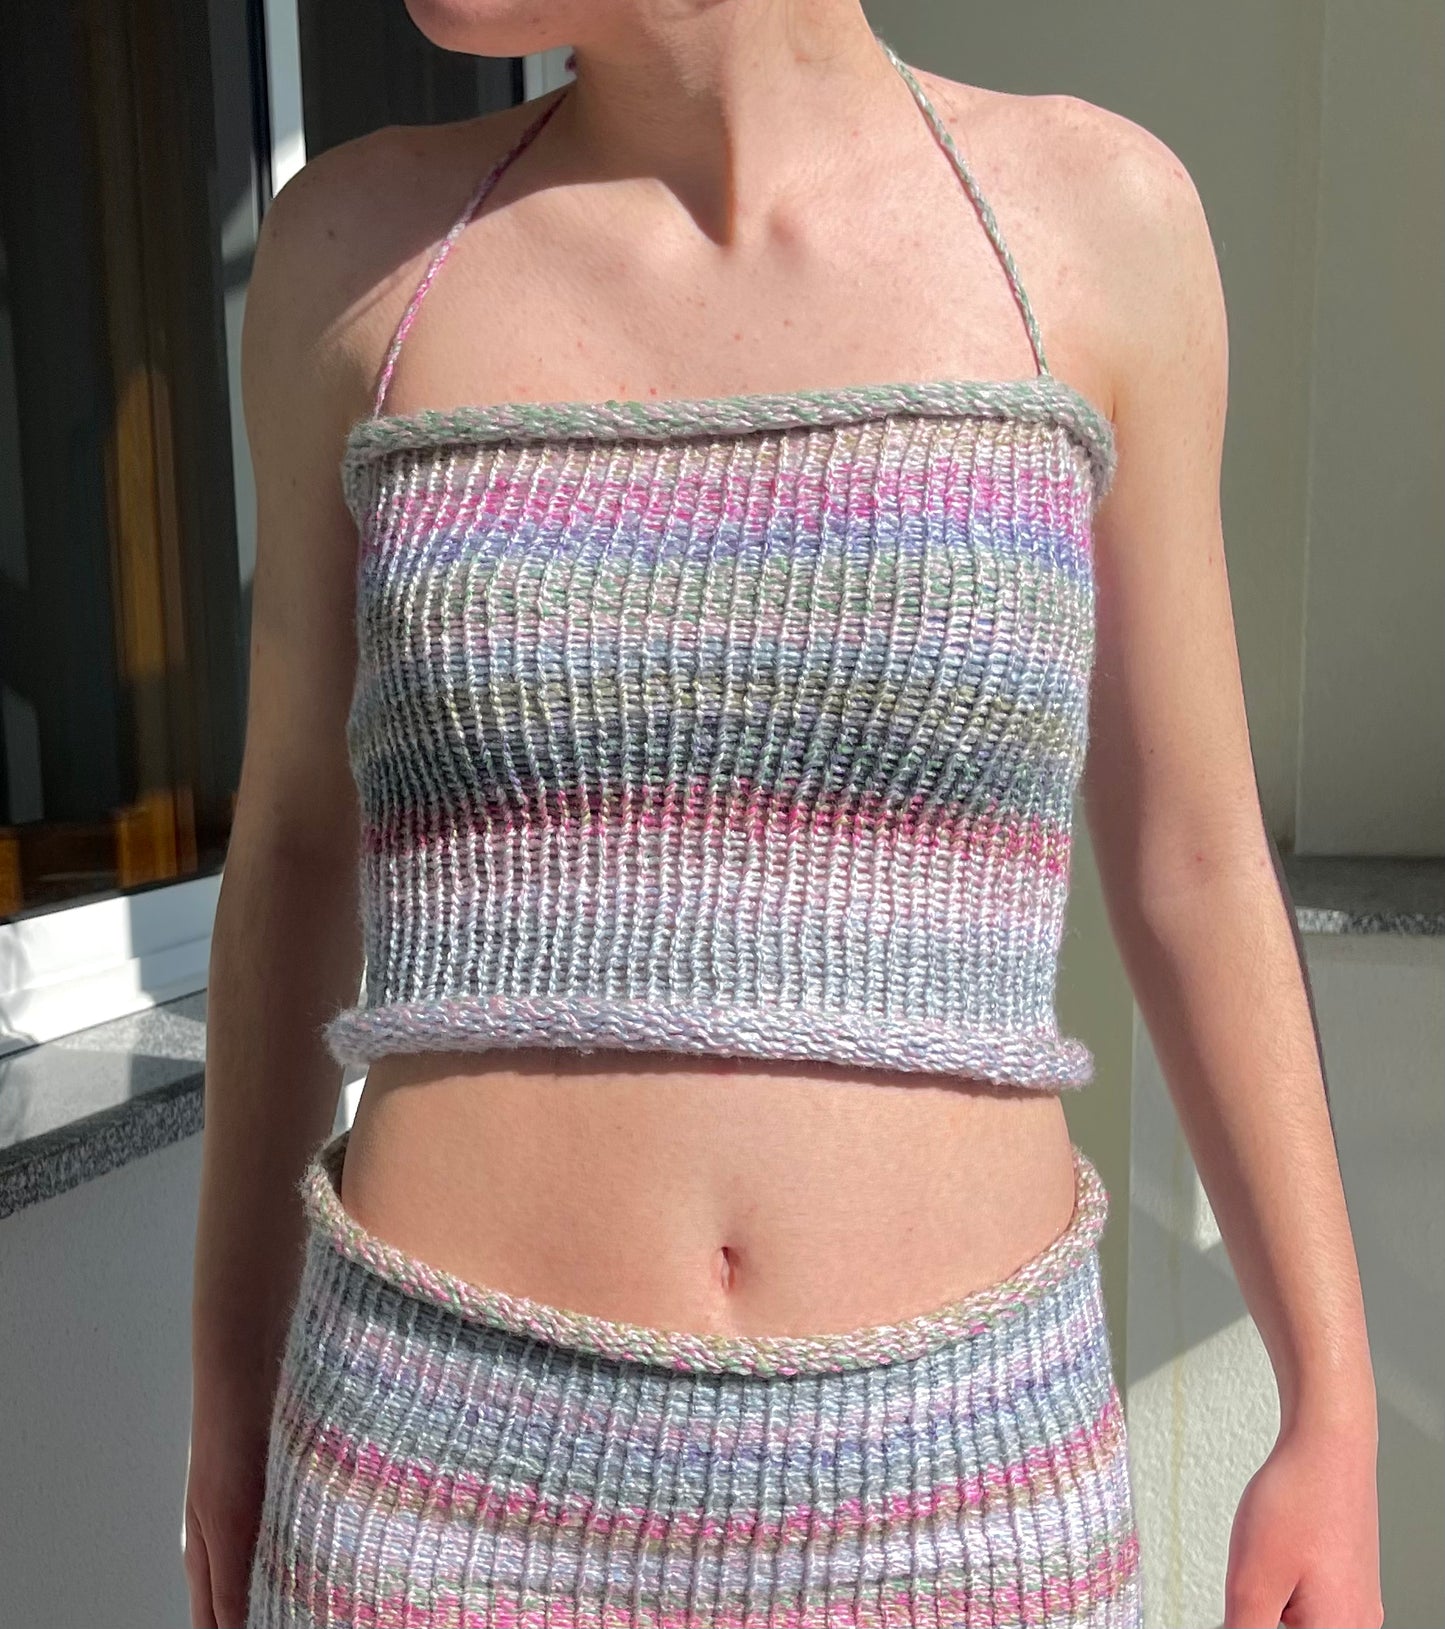 Handmade knitted criss-cross halter neck top in pastel shades